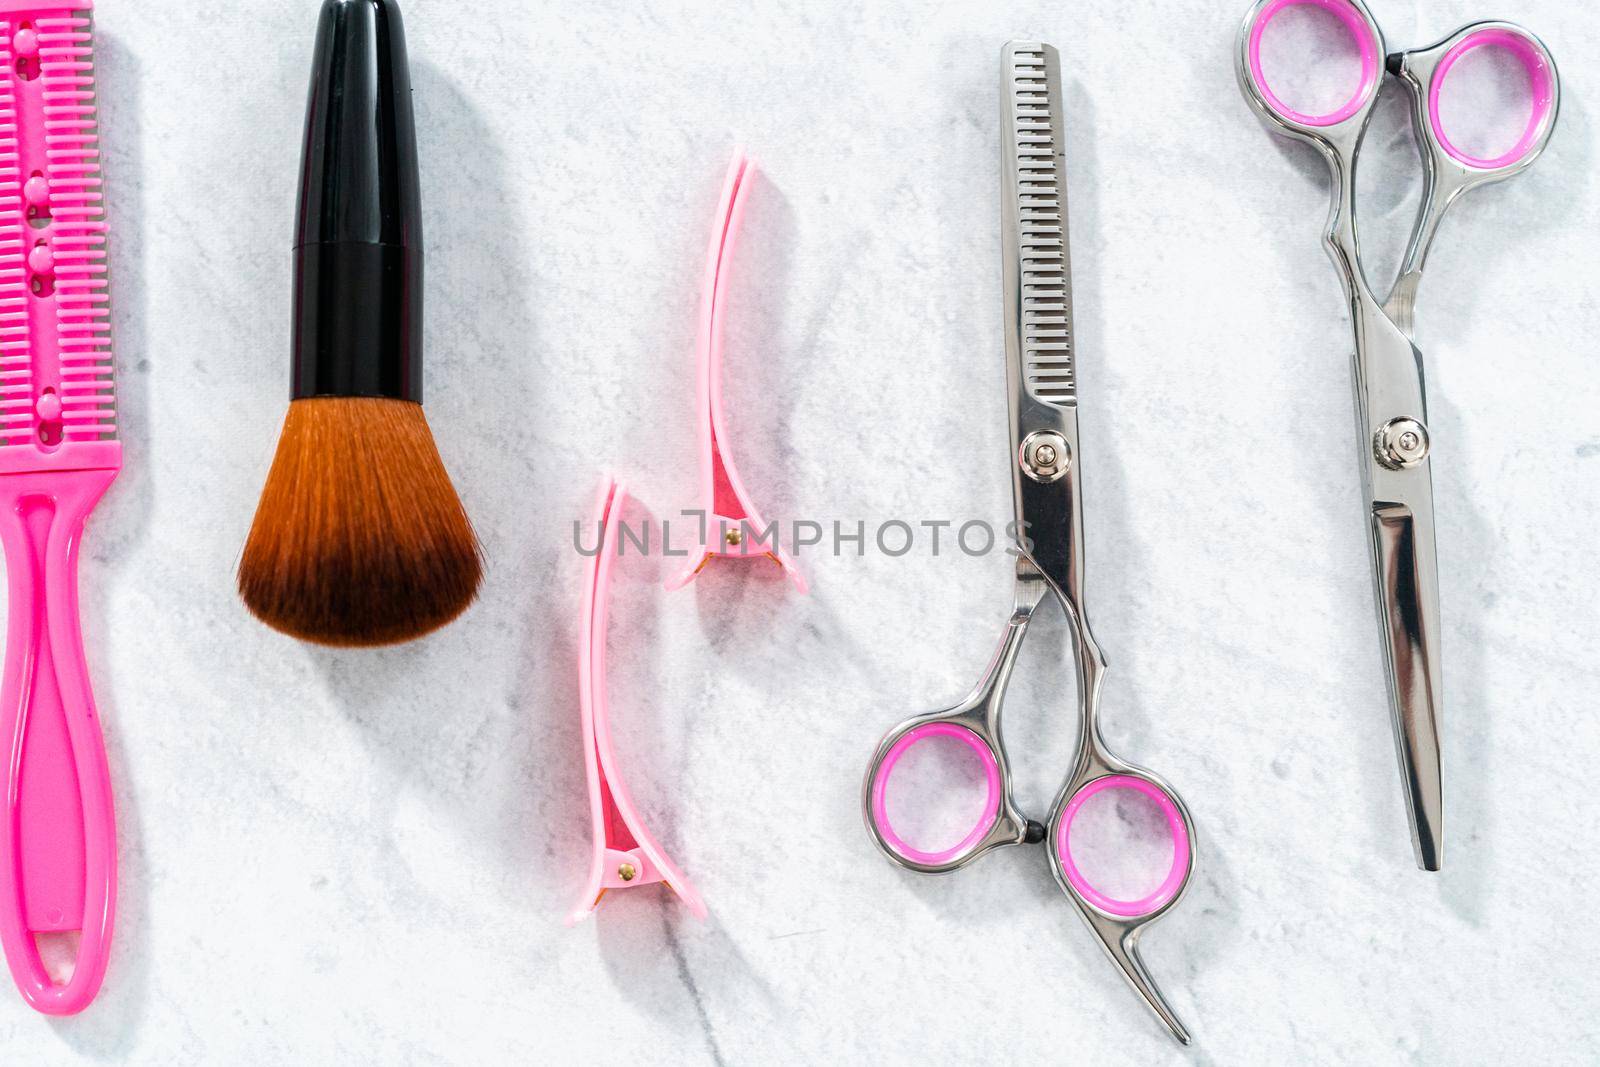 New barber set with pink scissors on a gray background.